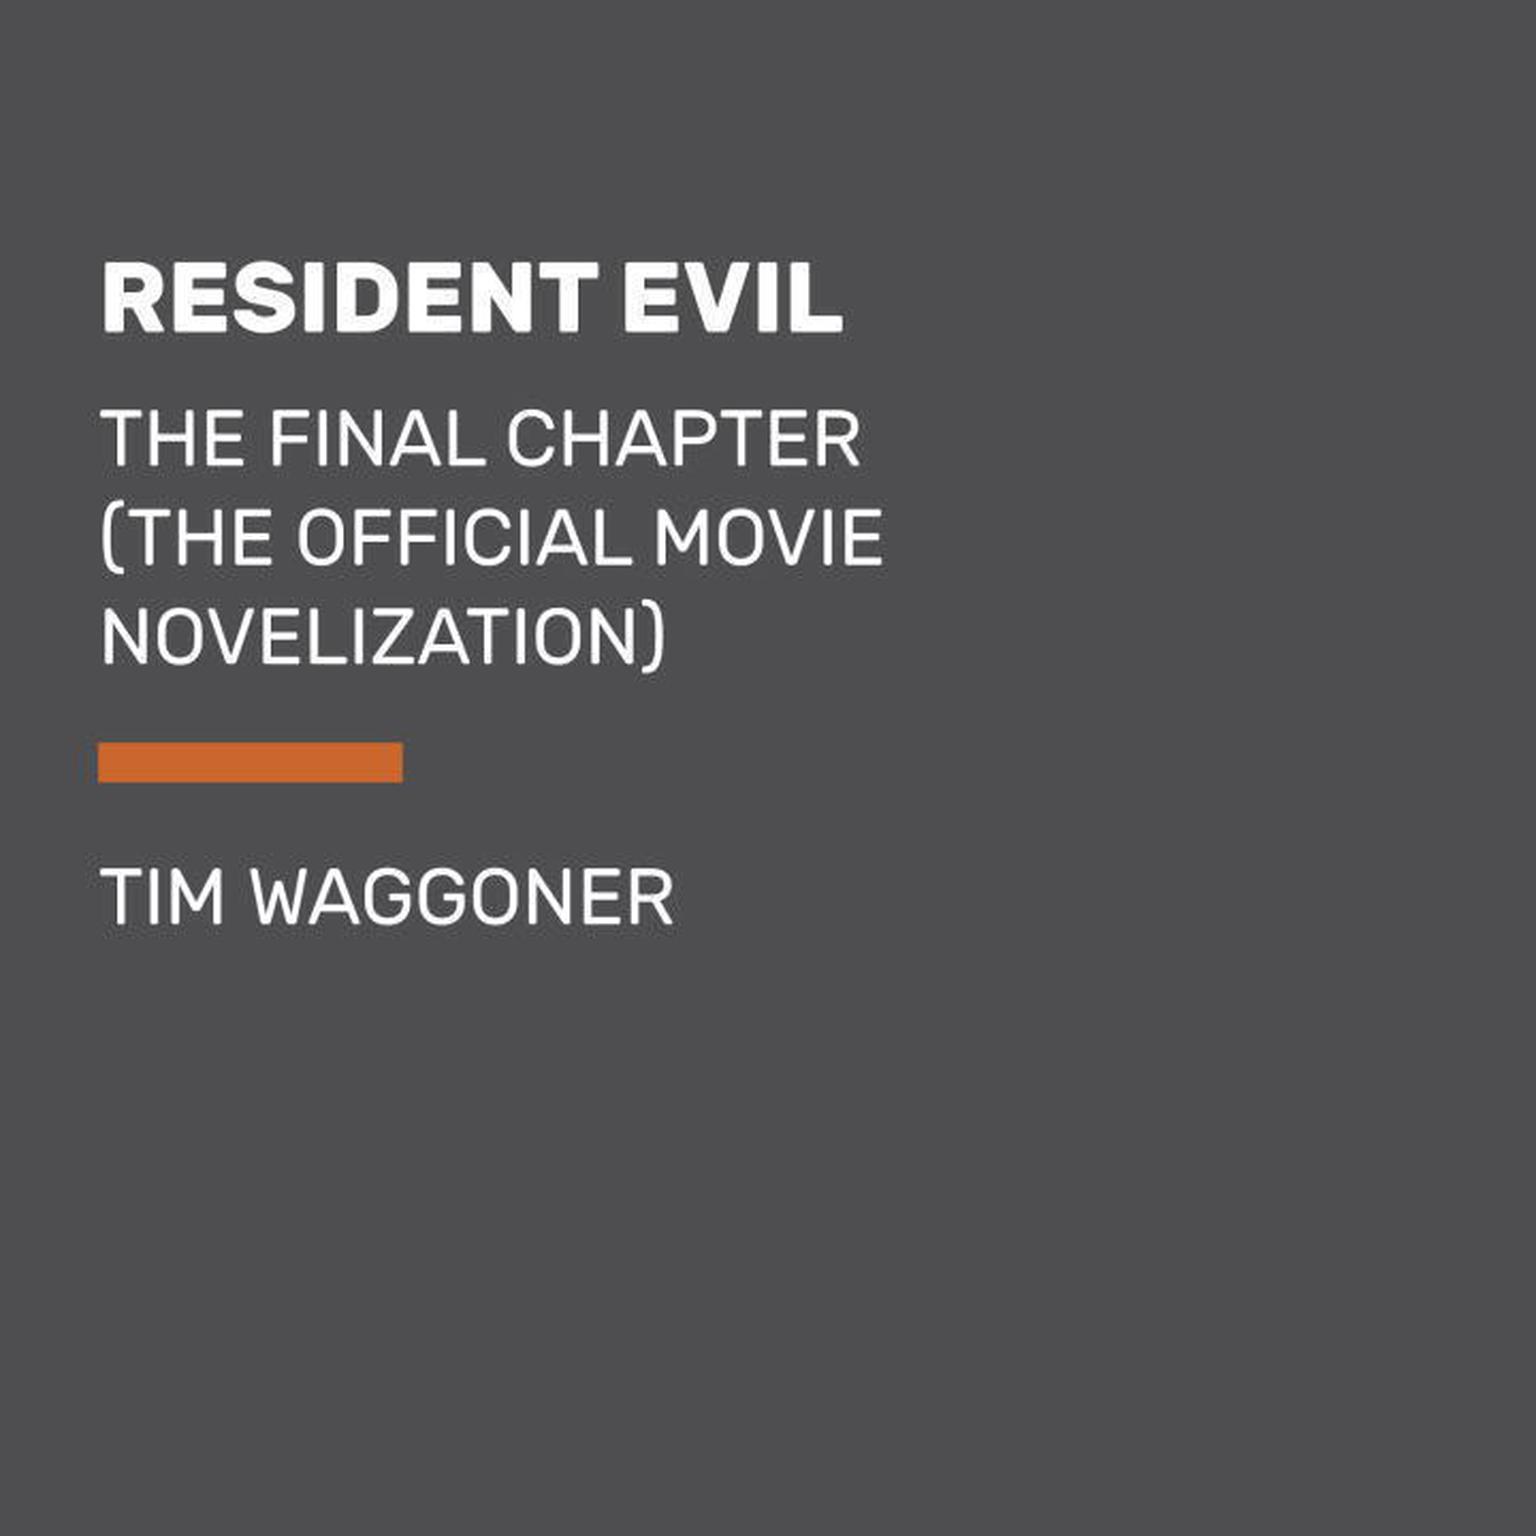 Resident Evil: The Final Chapter (The Official Movie Novelization) Audiobook, by Tim Waggoner